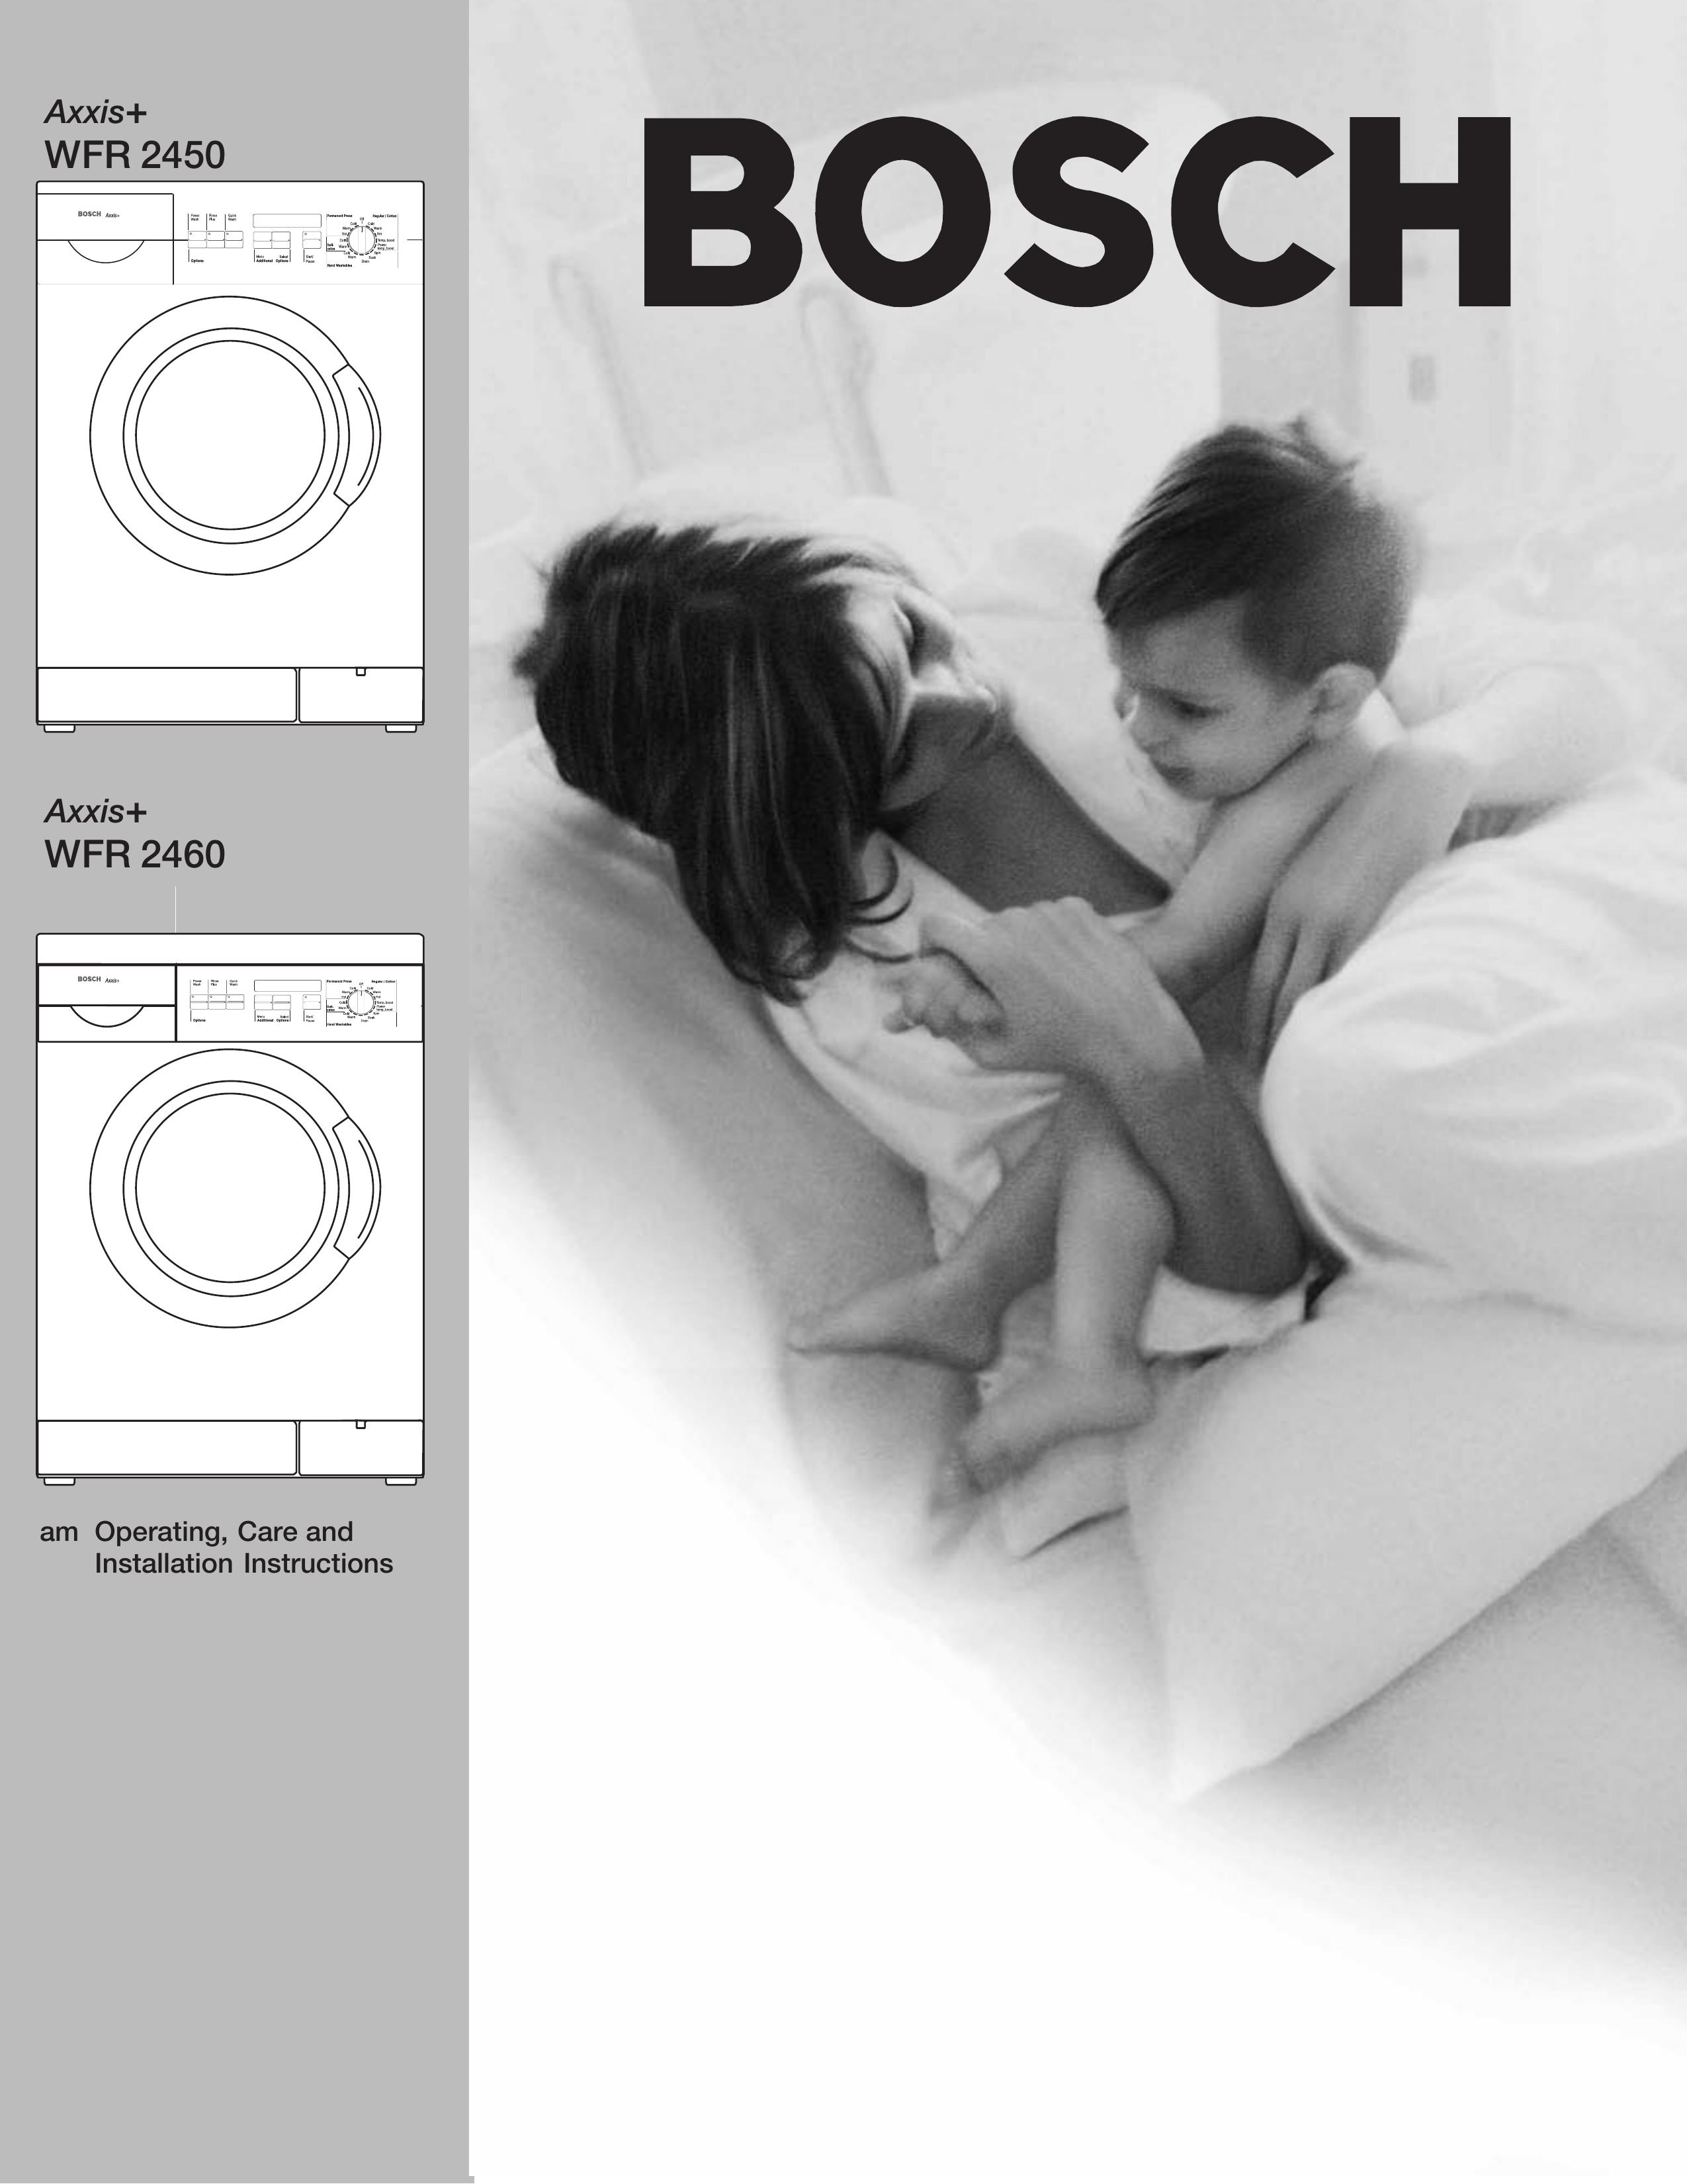 Bosch Appliances Axxis+ WFR 2460 Washer User Manual